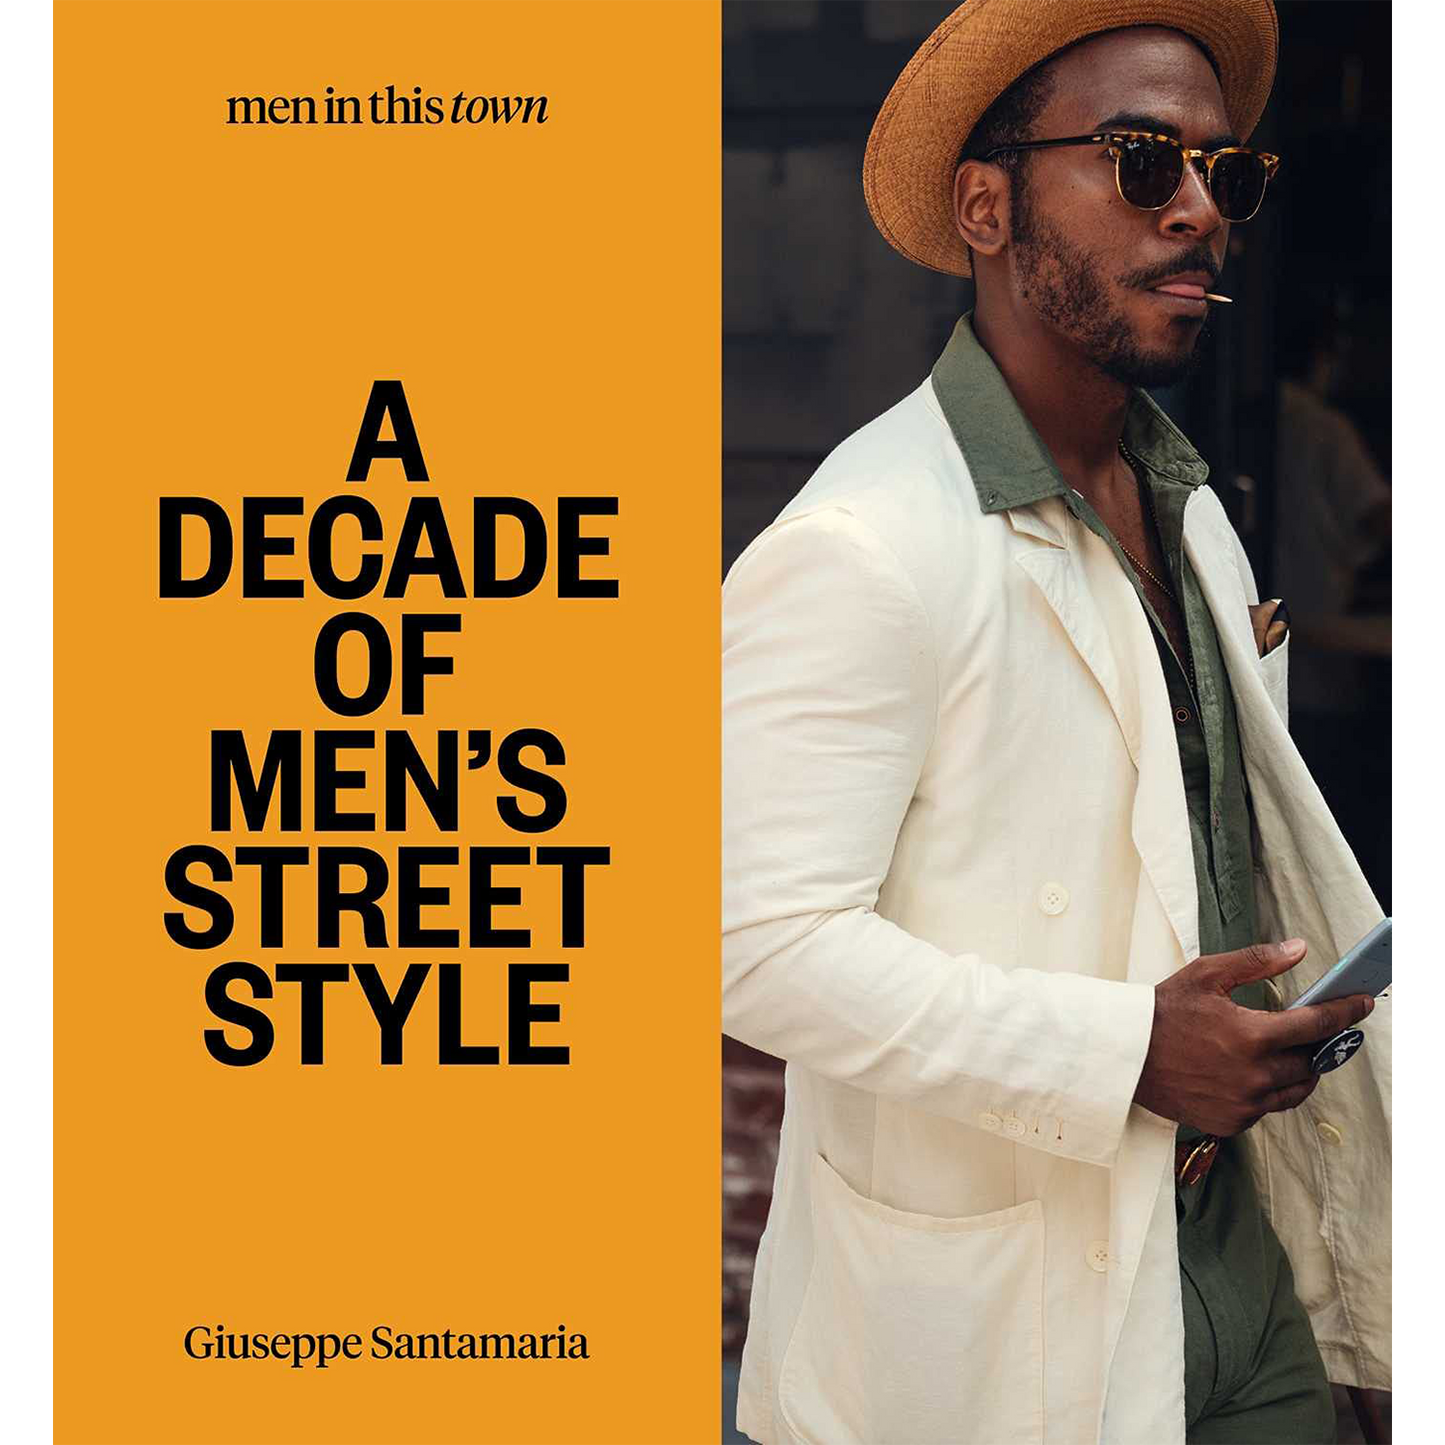 Men in This Town: A Decade of Men's Street Style